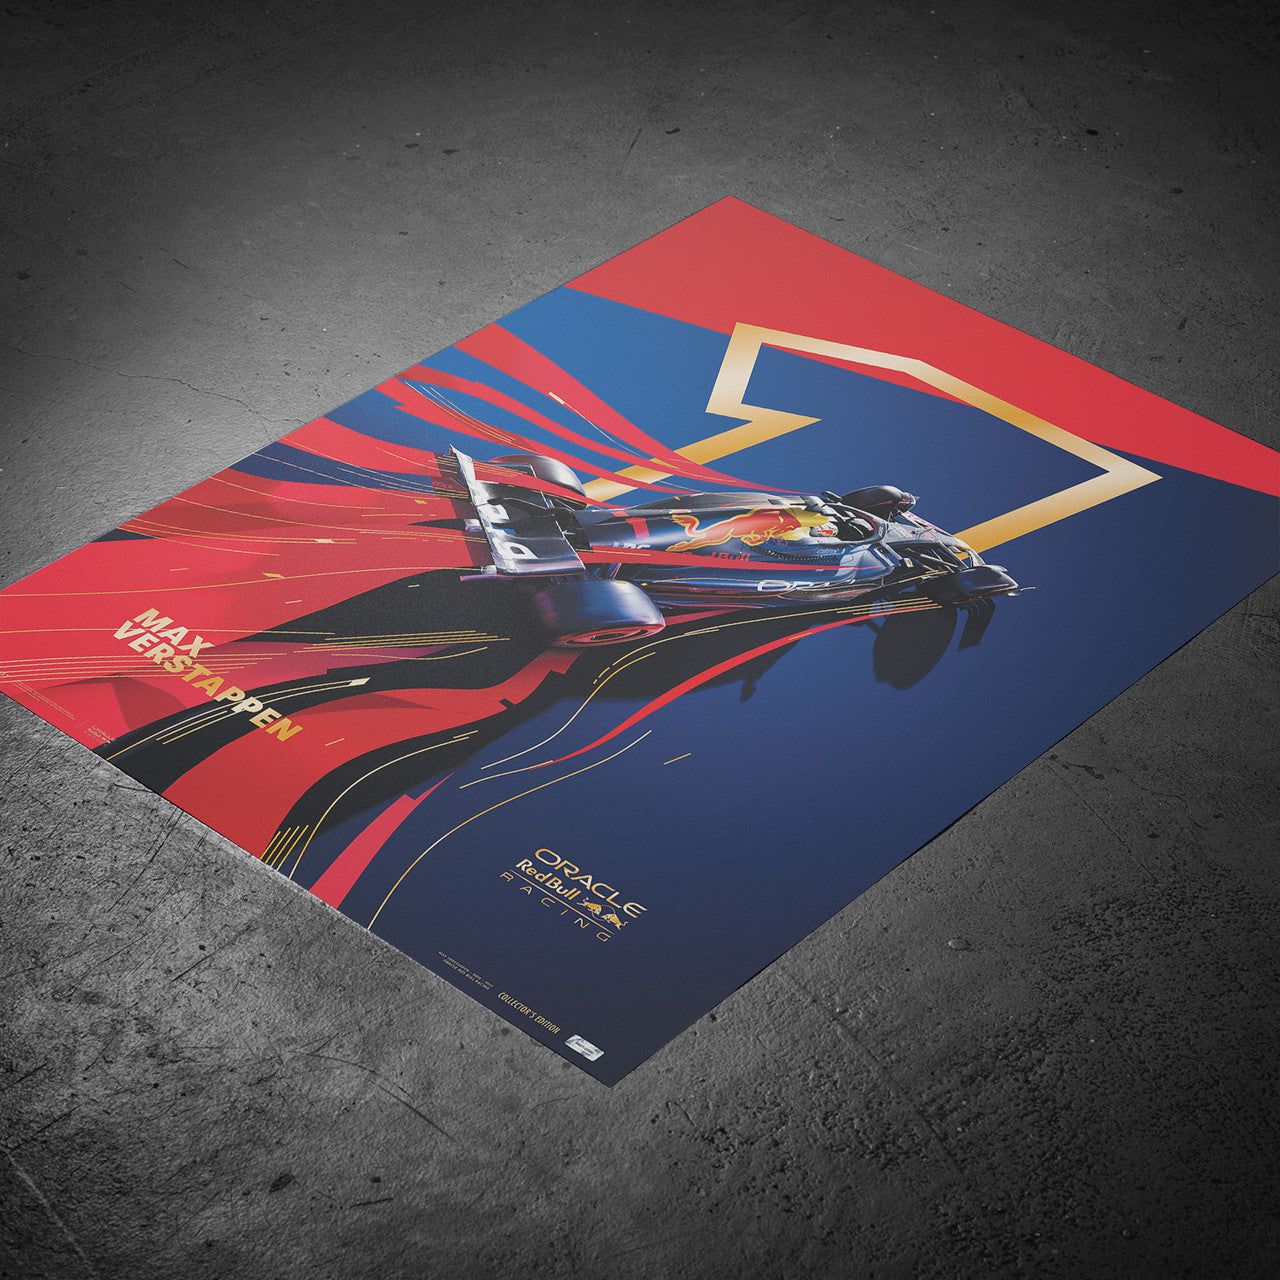 Oracle Red Bull Racing - Max Verstappen - 2022 | Collector's Edition